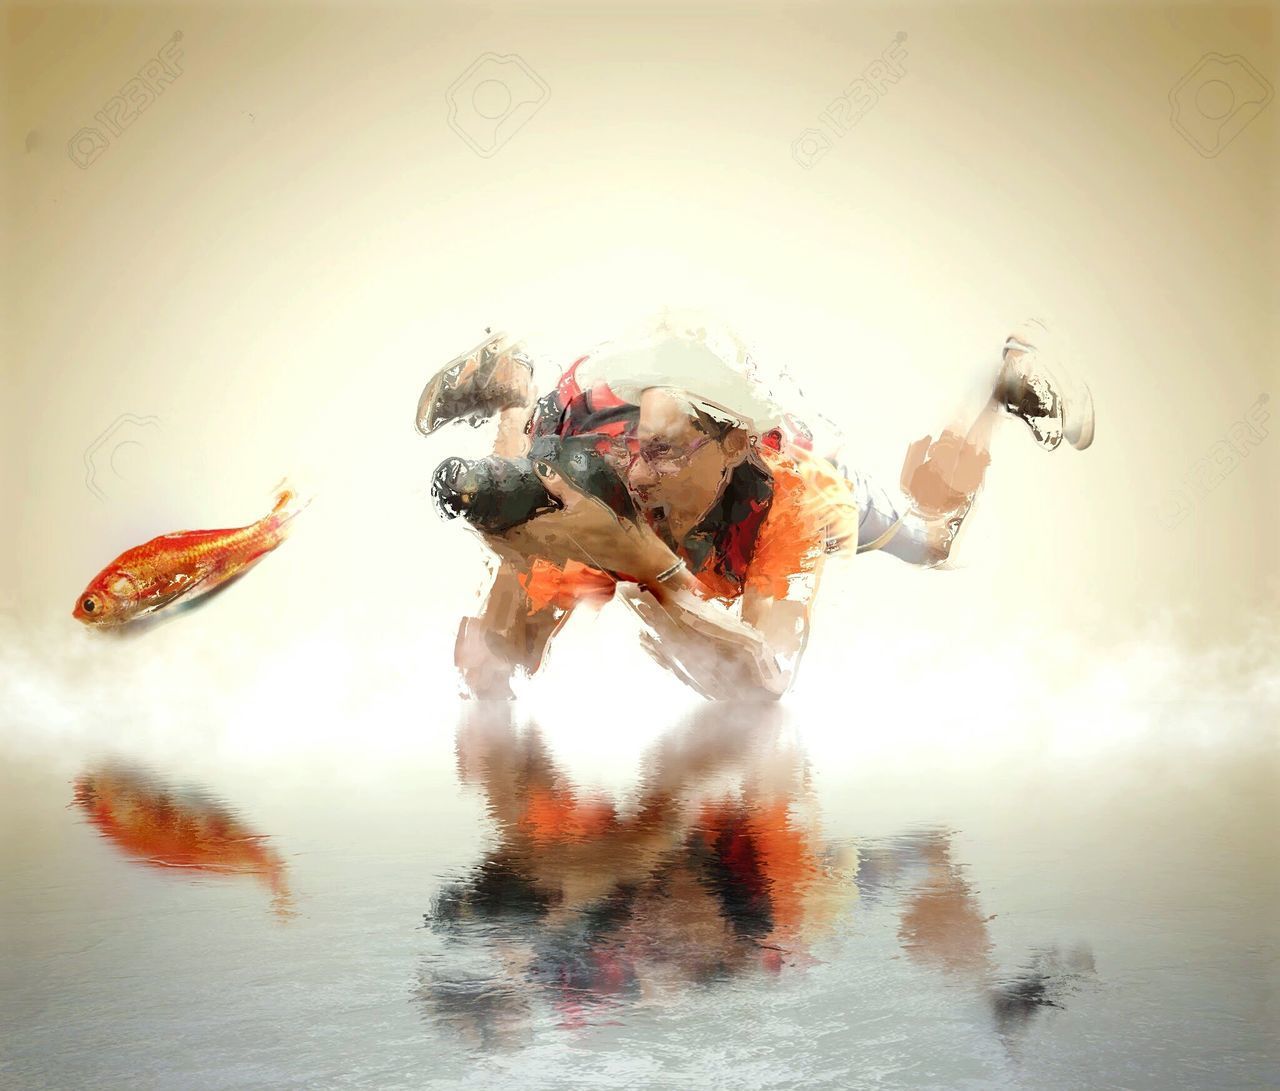 DIGITAL COMPOSITE IMAGE OF WOMAN IN WATER